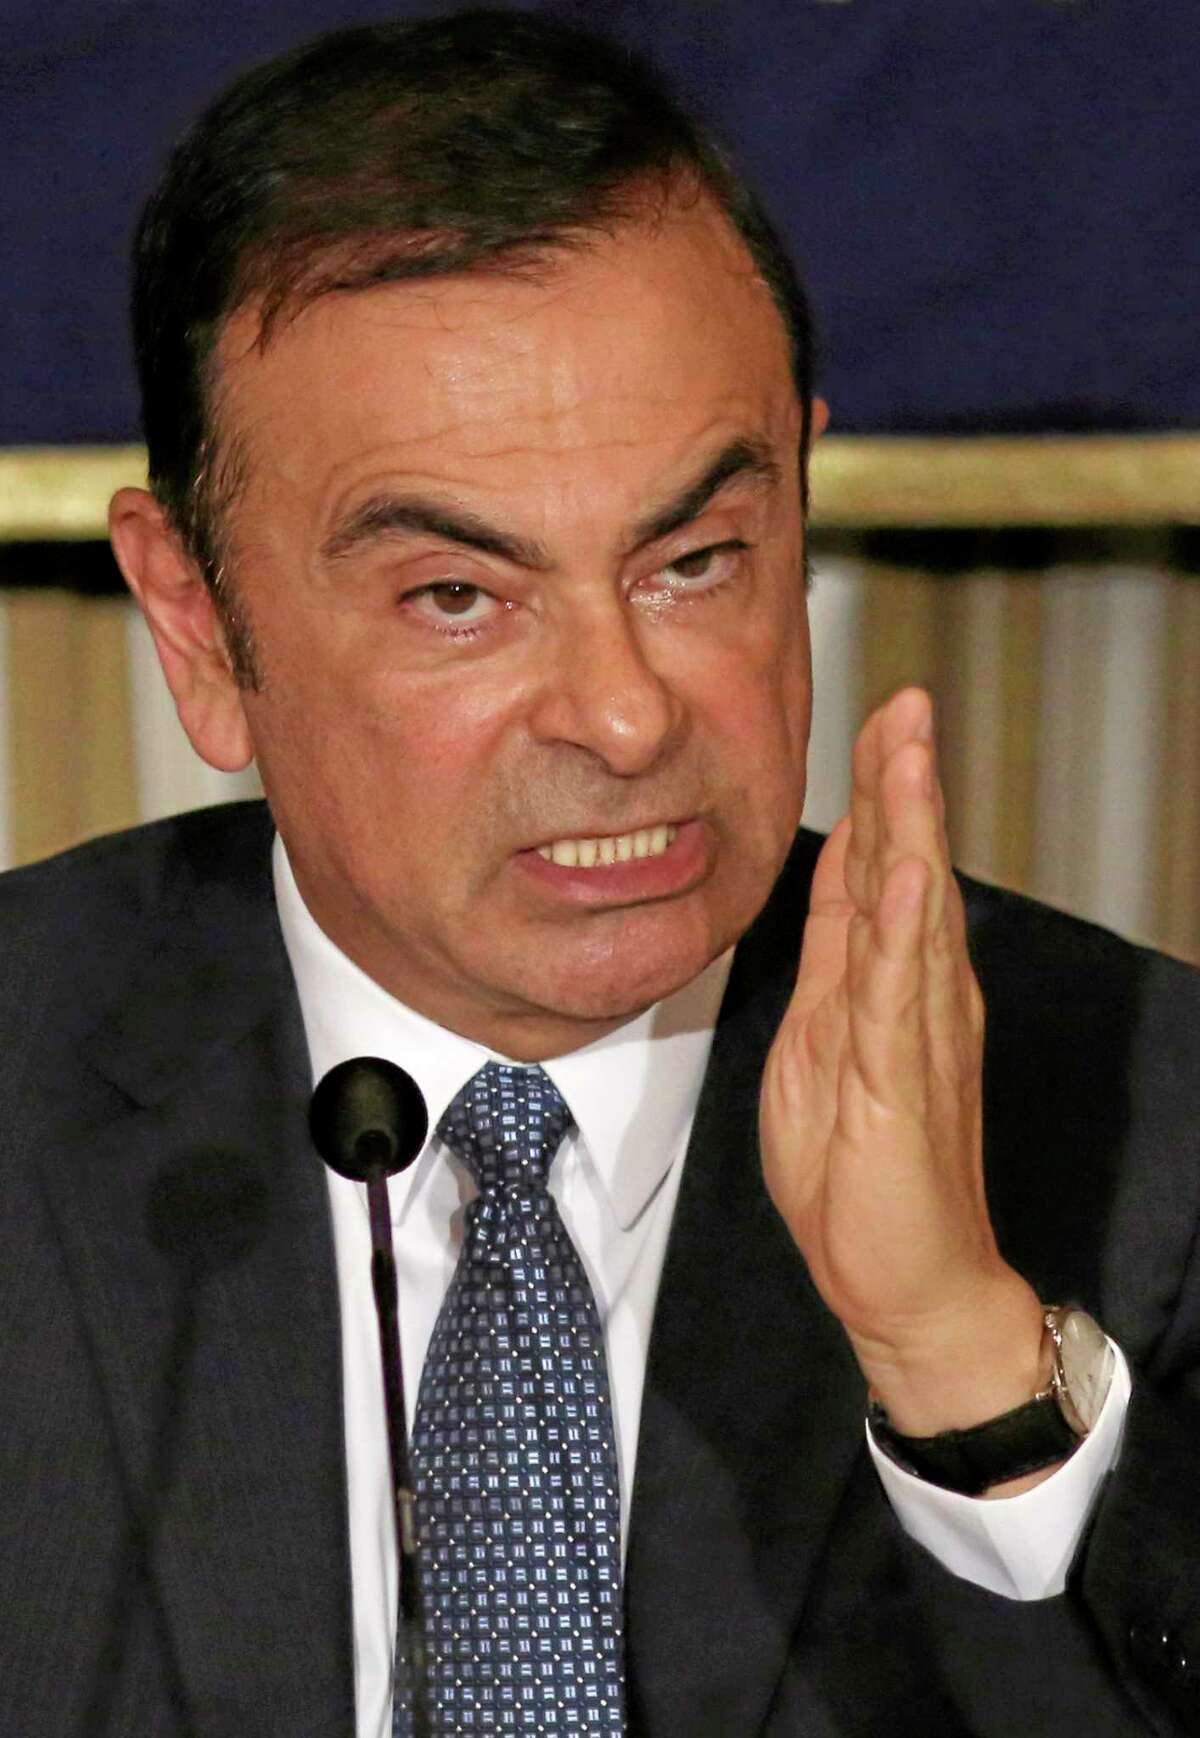 Nissan Chief Executive Carlos Ghosn gestures while speaking during a press conference at Foreign Correspondents' Club of Japan in Tokyo, Thursday, July 17, 2014. Ghosn, who has long made a point of promoting women to management positions, said the Japanese Prime Minister Shinzo Abe's plan to boost female bosses to 30 percent by 2020 is too ambitious. The participation of women in Japan's workforce is very low by developed nation standards. Women make up 2.9 percent of manager-level and higher positions at Japanese companies employing 5,000 or more people. (AP Photo/Eugene Hoshiko)